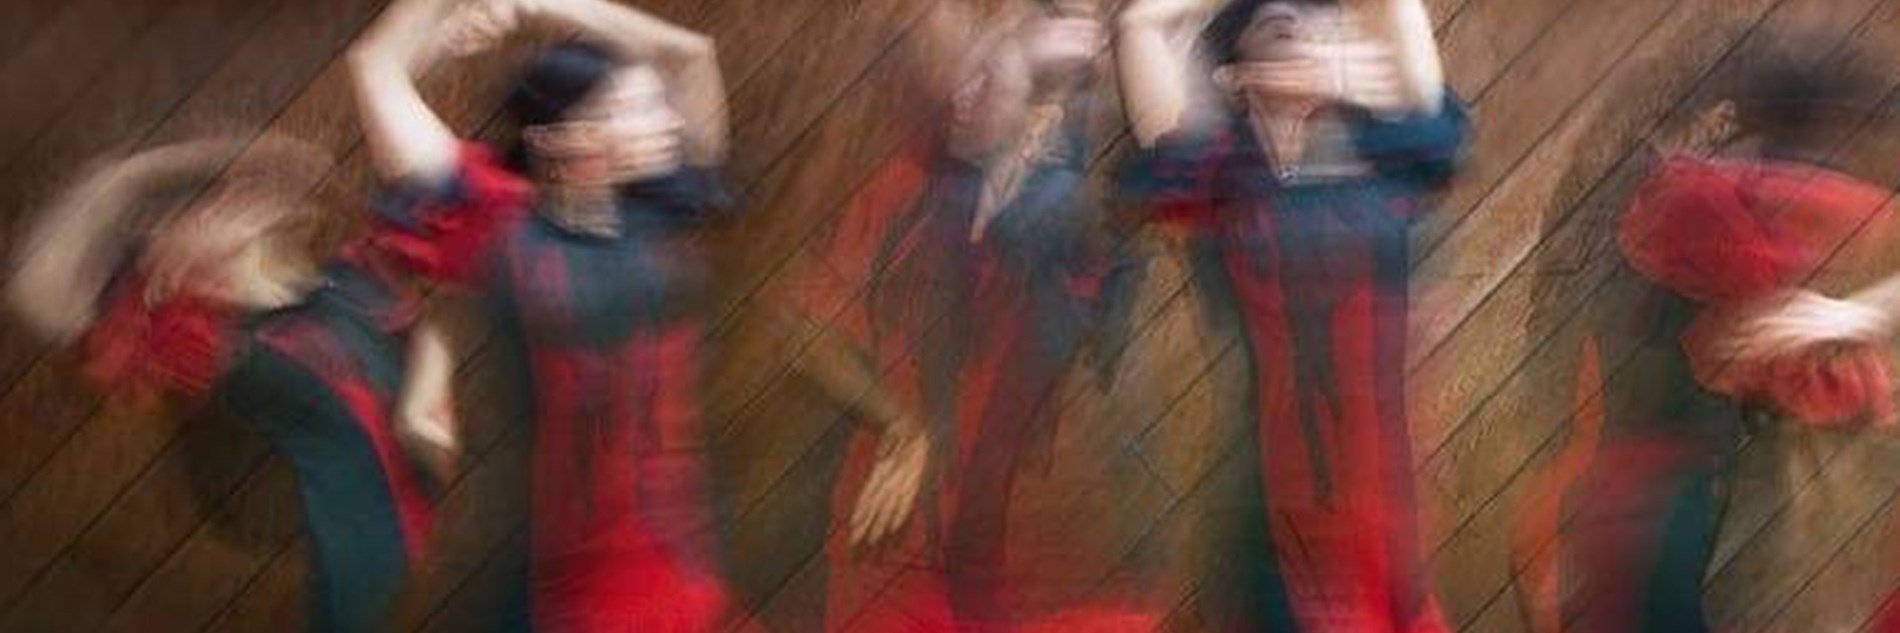 A blurred composite image of 5 women dancing against a wooden flooring background. They are wearing red and black frilled dresses and are twisting their arms above their heads